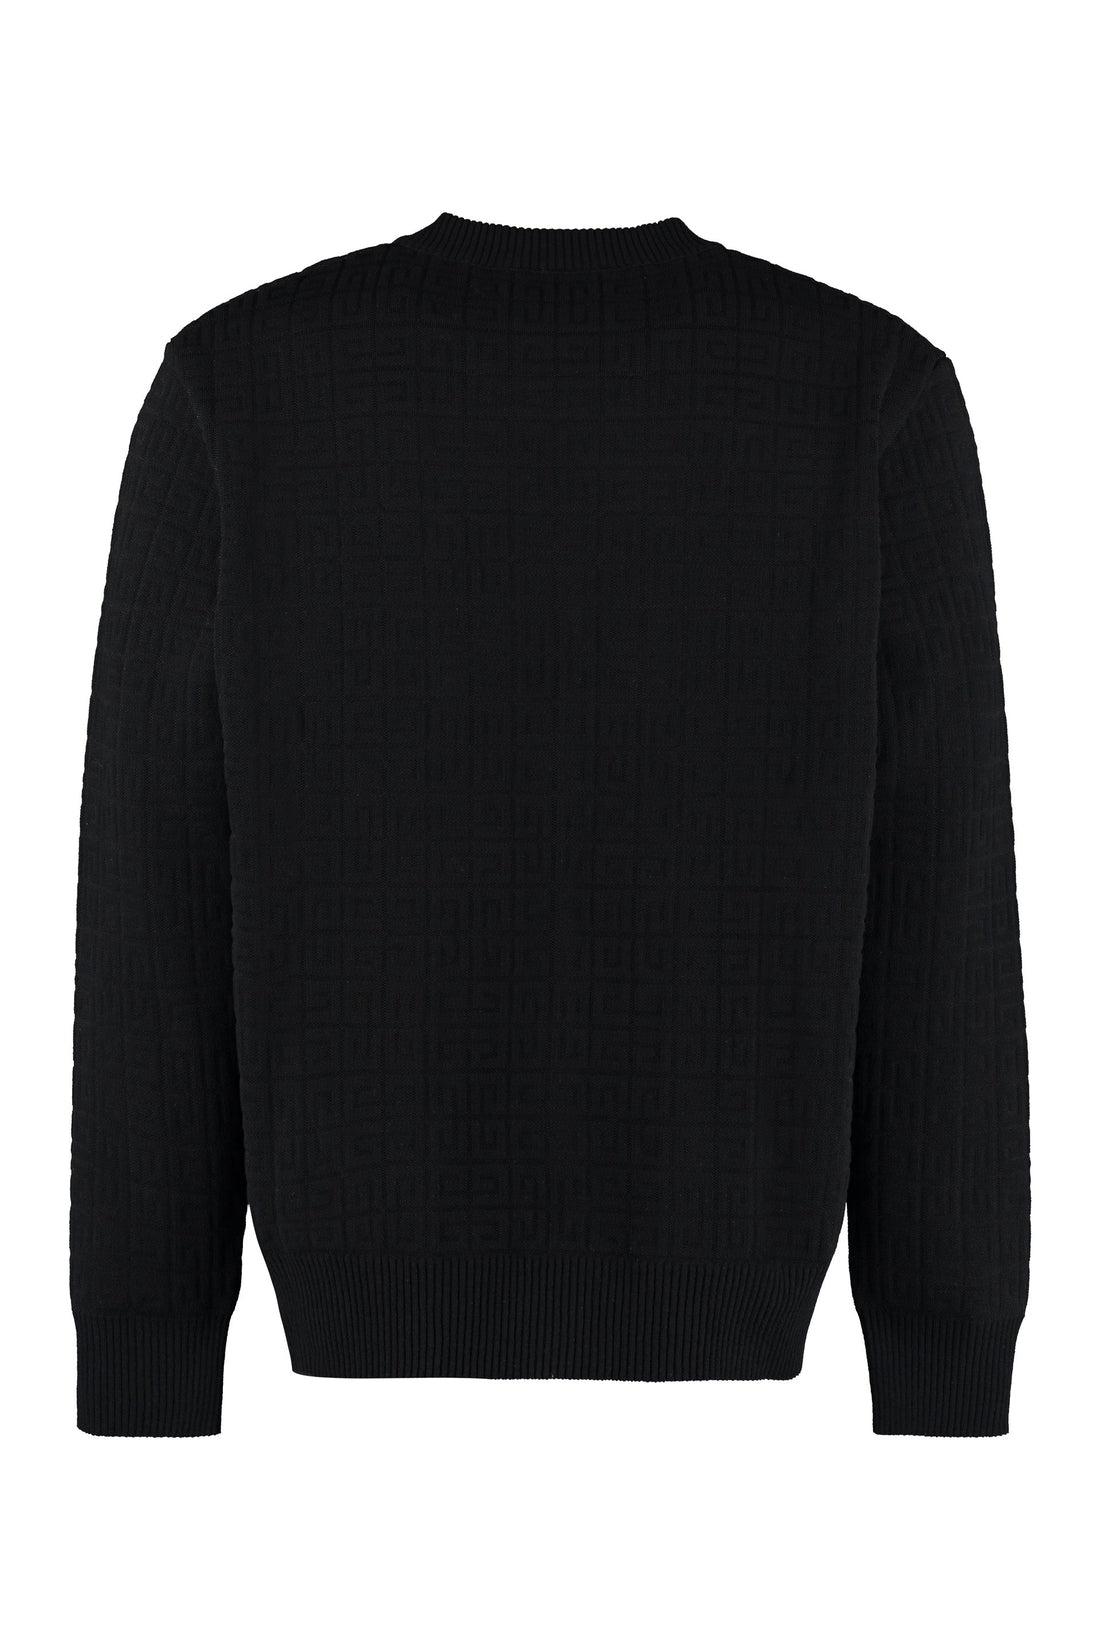 Givenchy-OUTLET-SALE-Long sleeve crew-neck sweater-ARCHIVIST